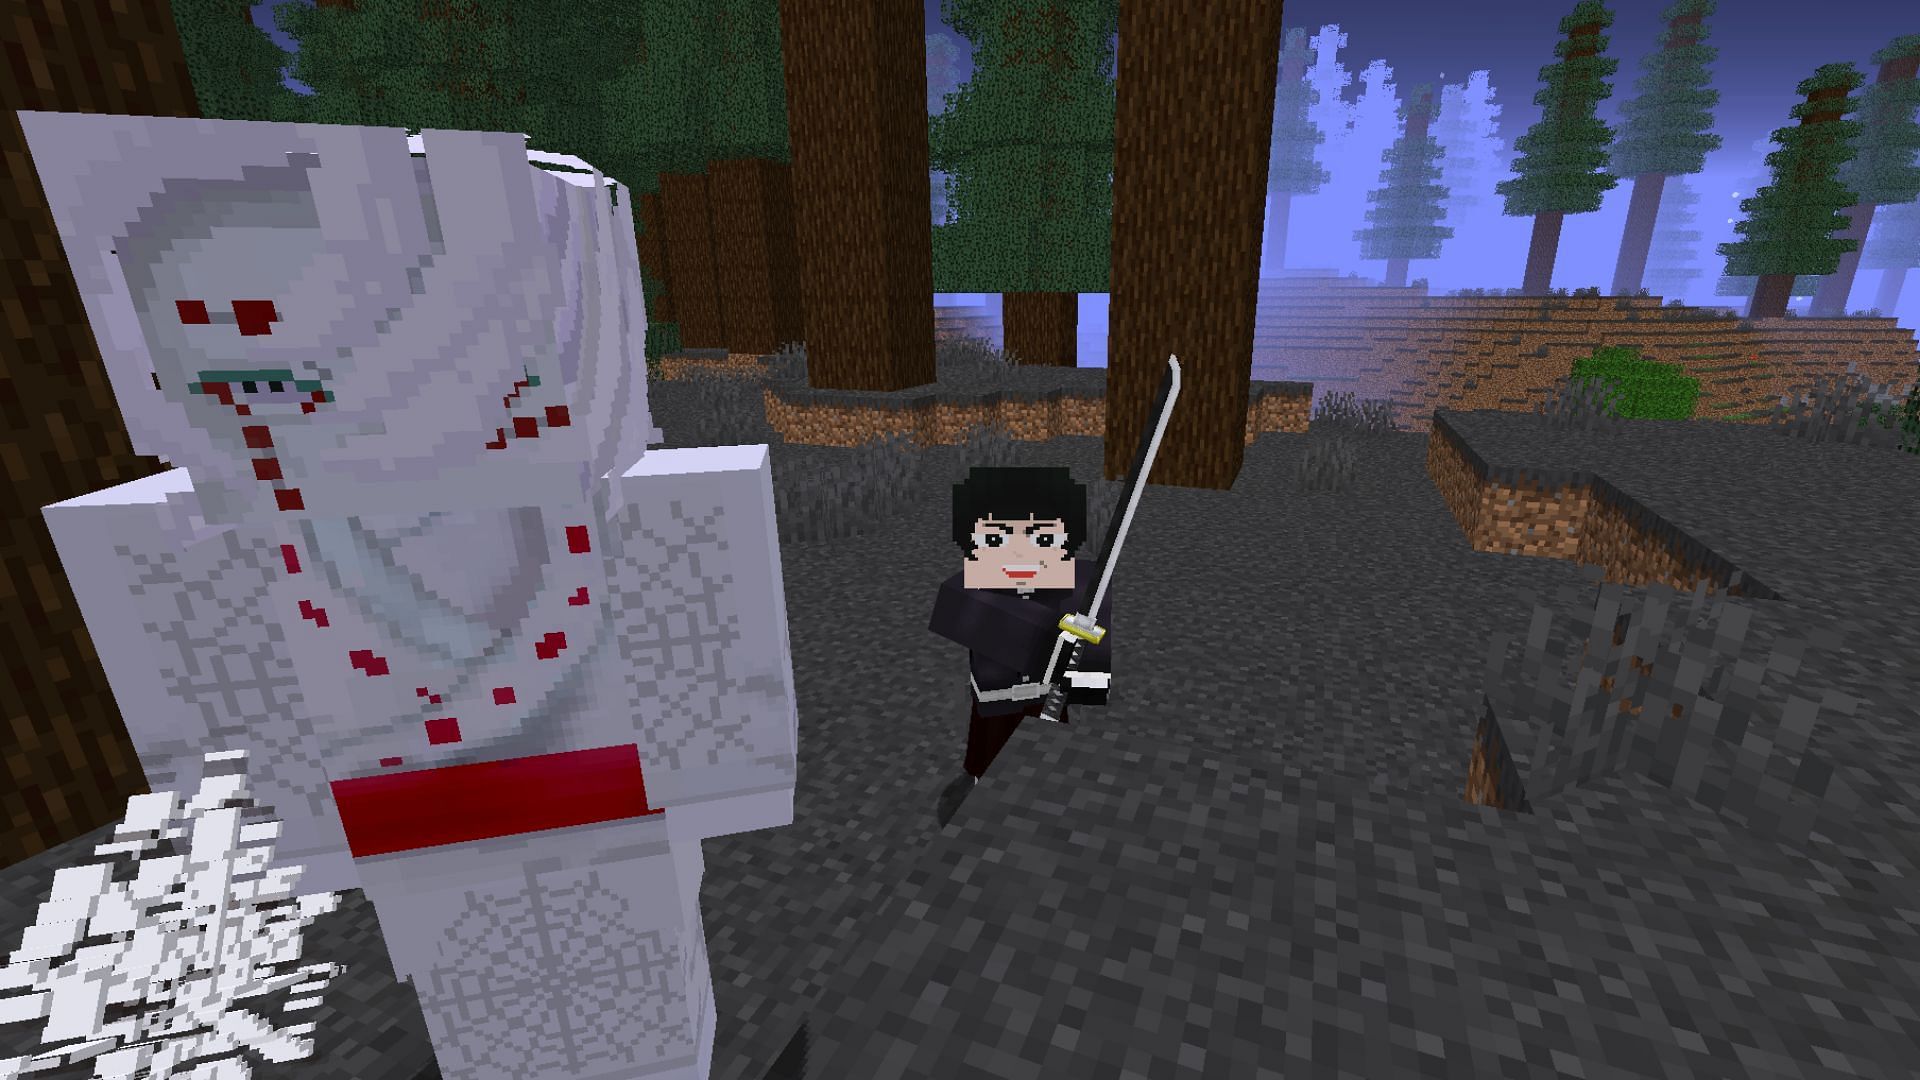 Minecraft x Demon Slayer fanart! What do you all think would be some Craft  Breathing forms!? @therealsketchyartist : r/KimetsuNoYaiba